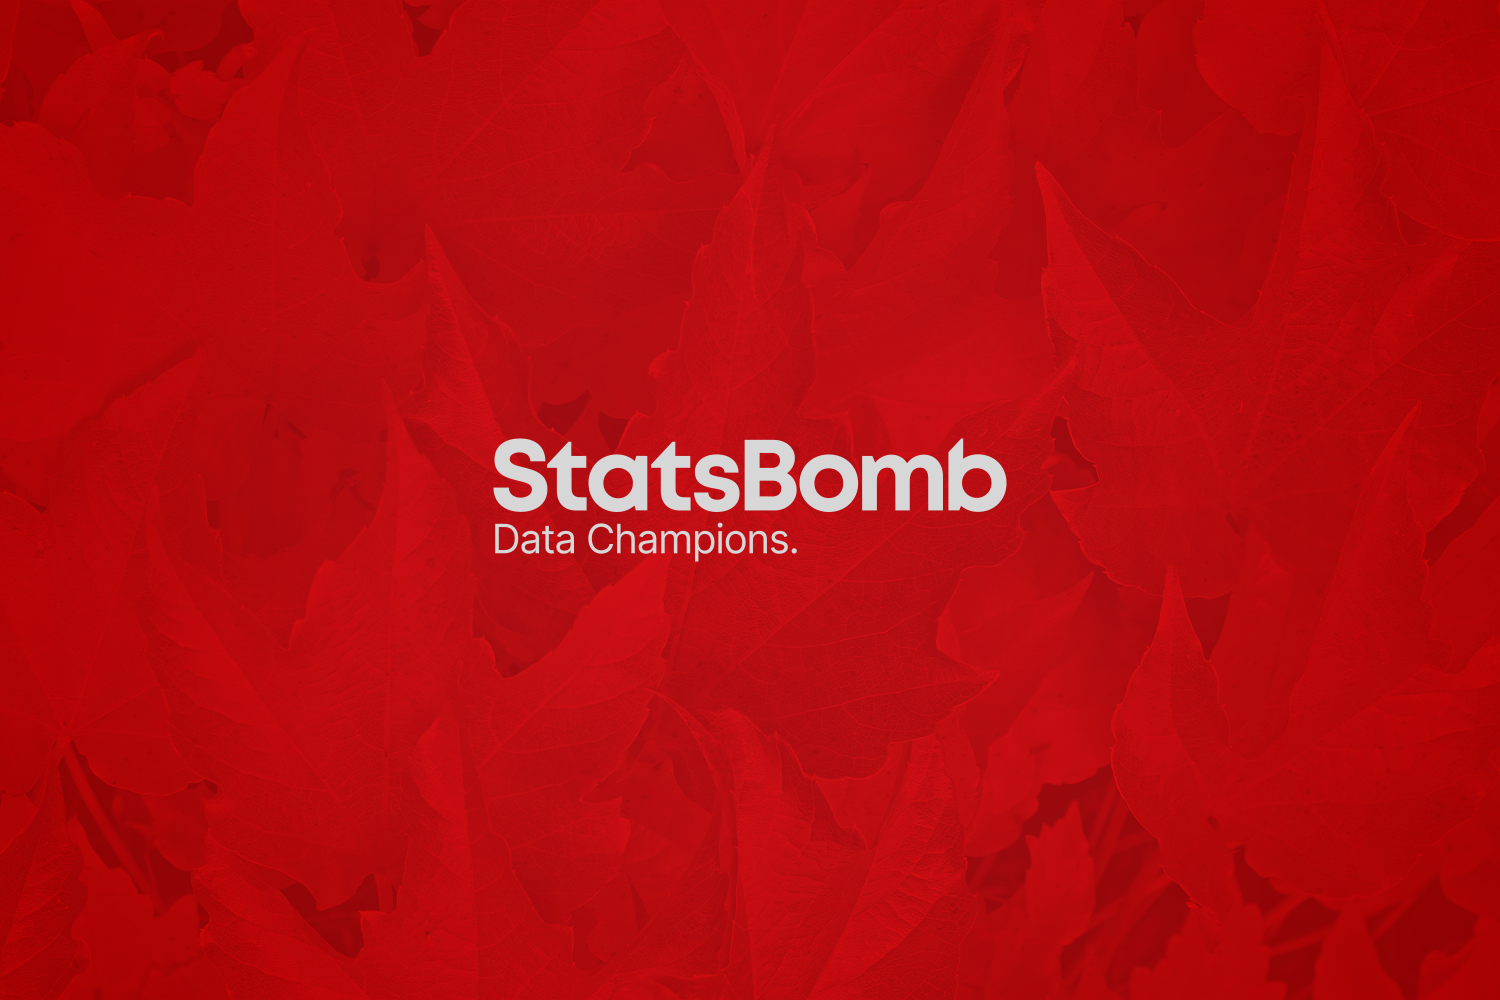 StatsBomb Expand International Growth With Canada Soccer Service Agreement